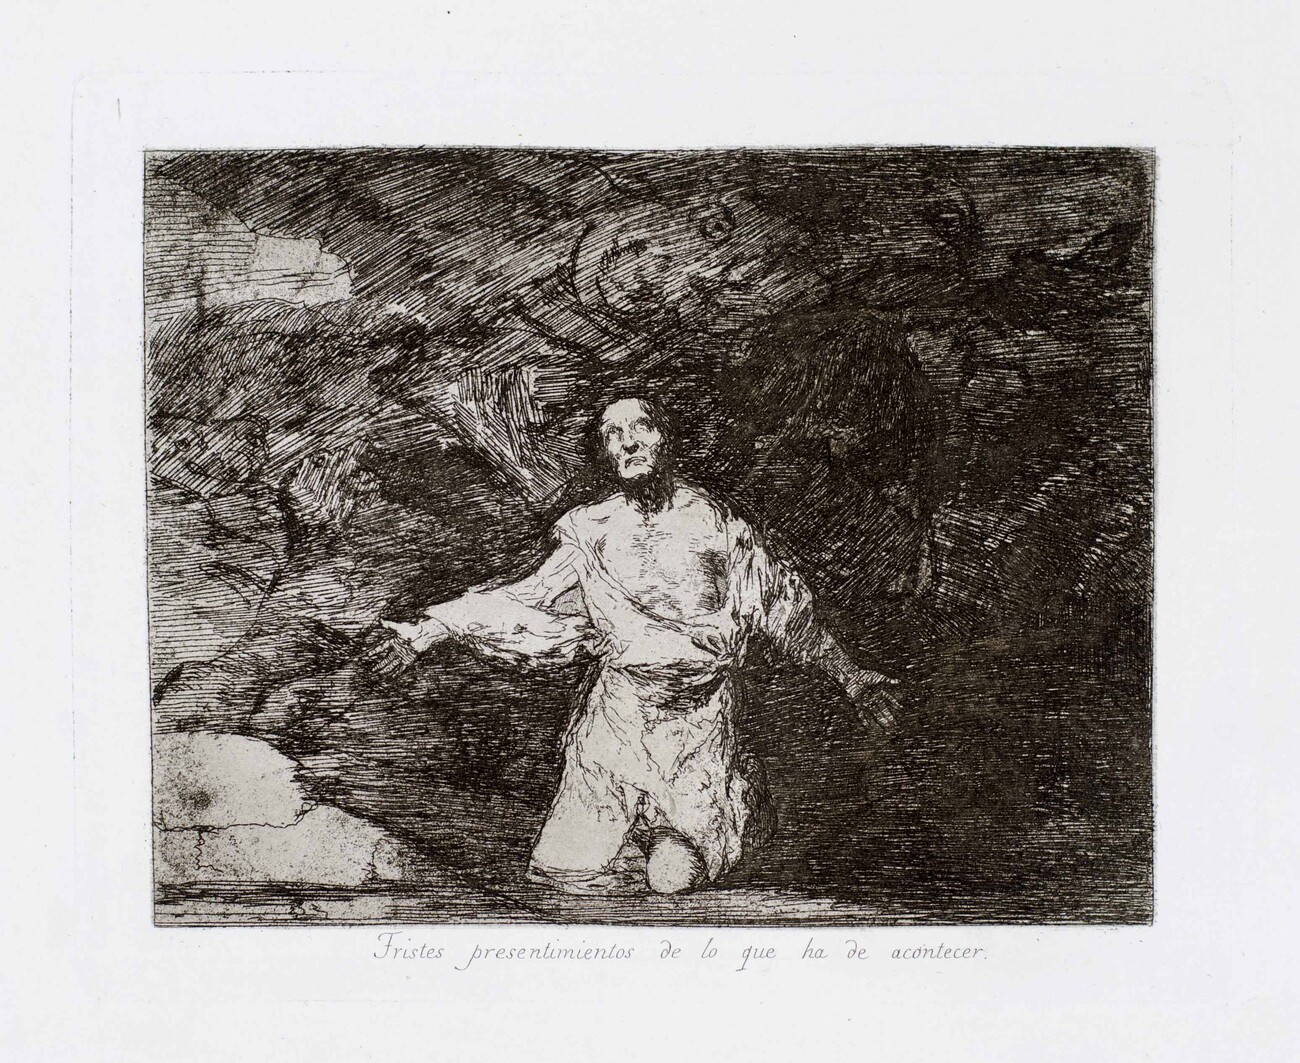 etching of person kneeling